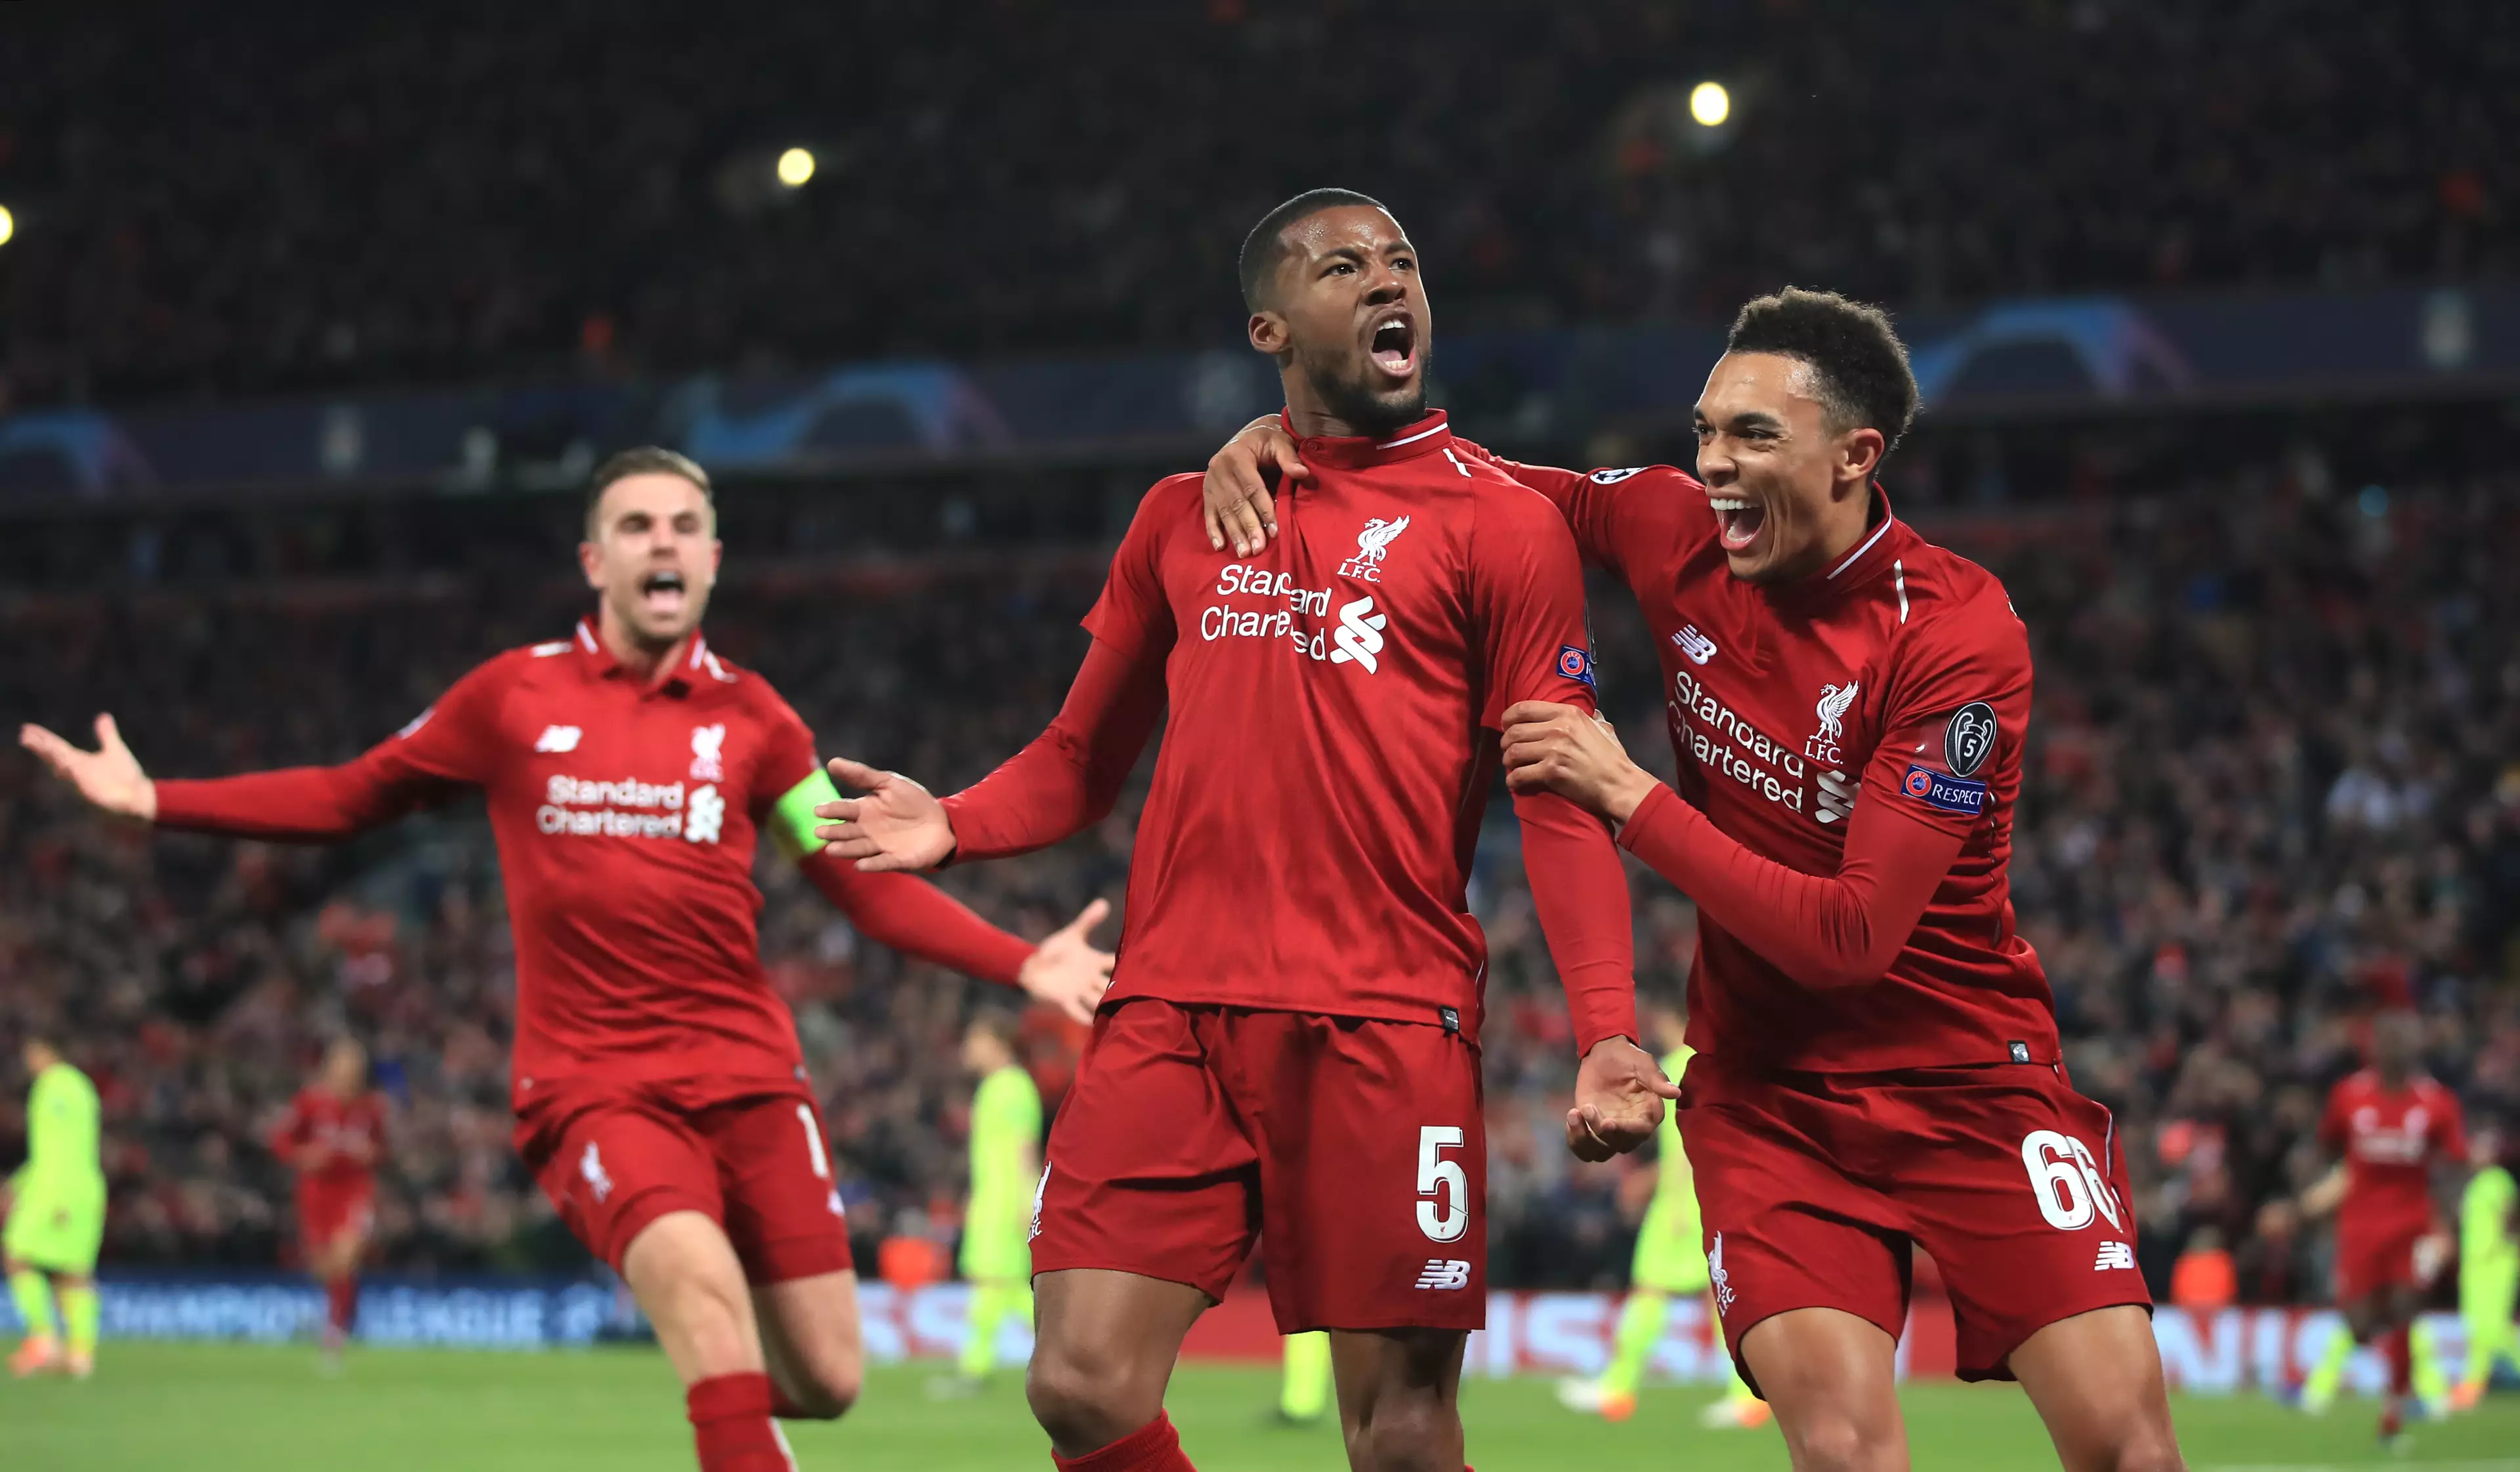 Liverpool beat Barcelona 4-0 at Anfield to complete a remarkable turnaround in their Champions League semi-final